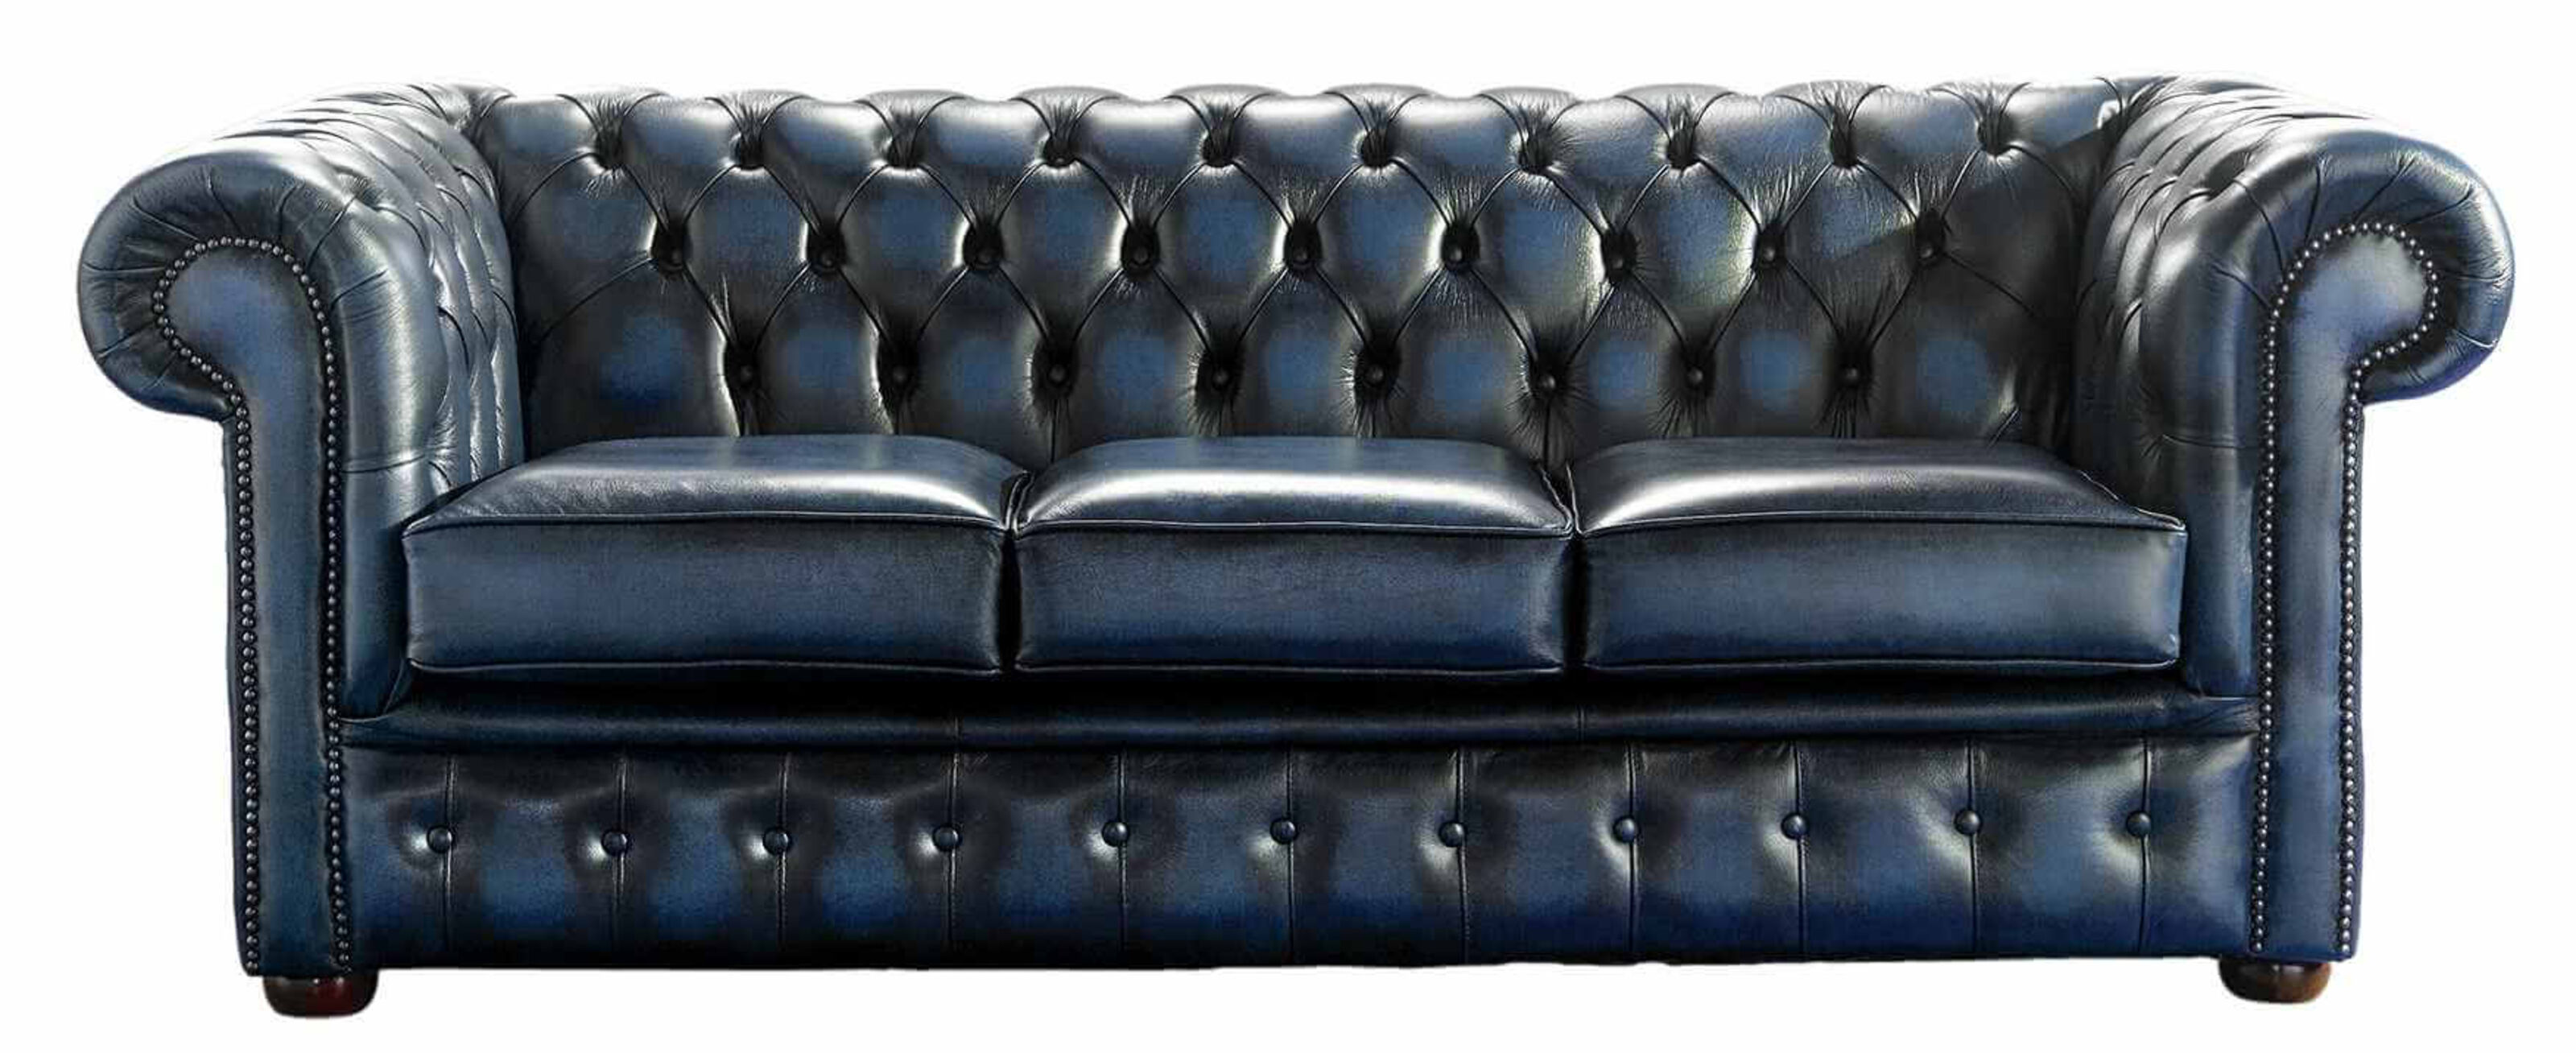 Chesterfield Furniture: Timeless Elegance that Never Goes Out of Style  %Post Title